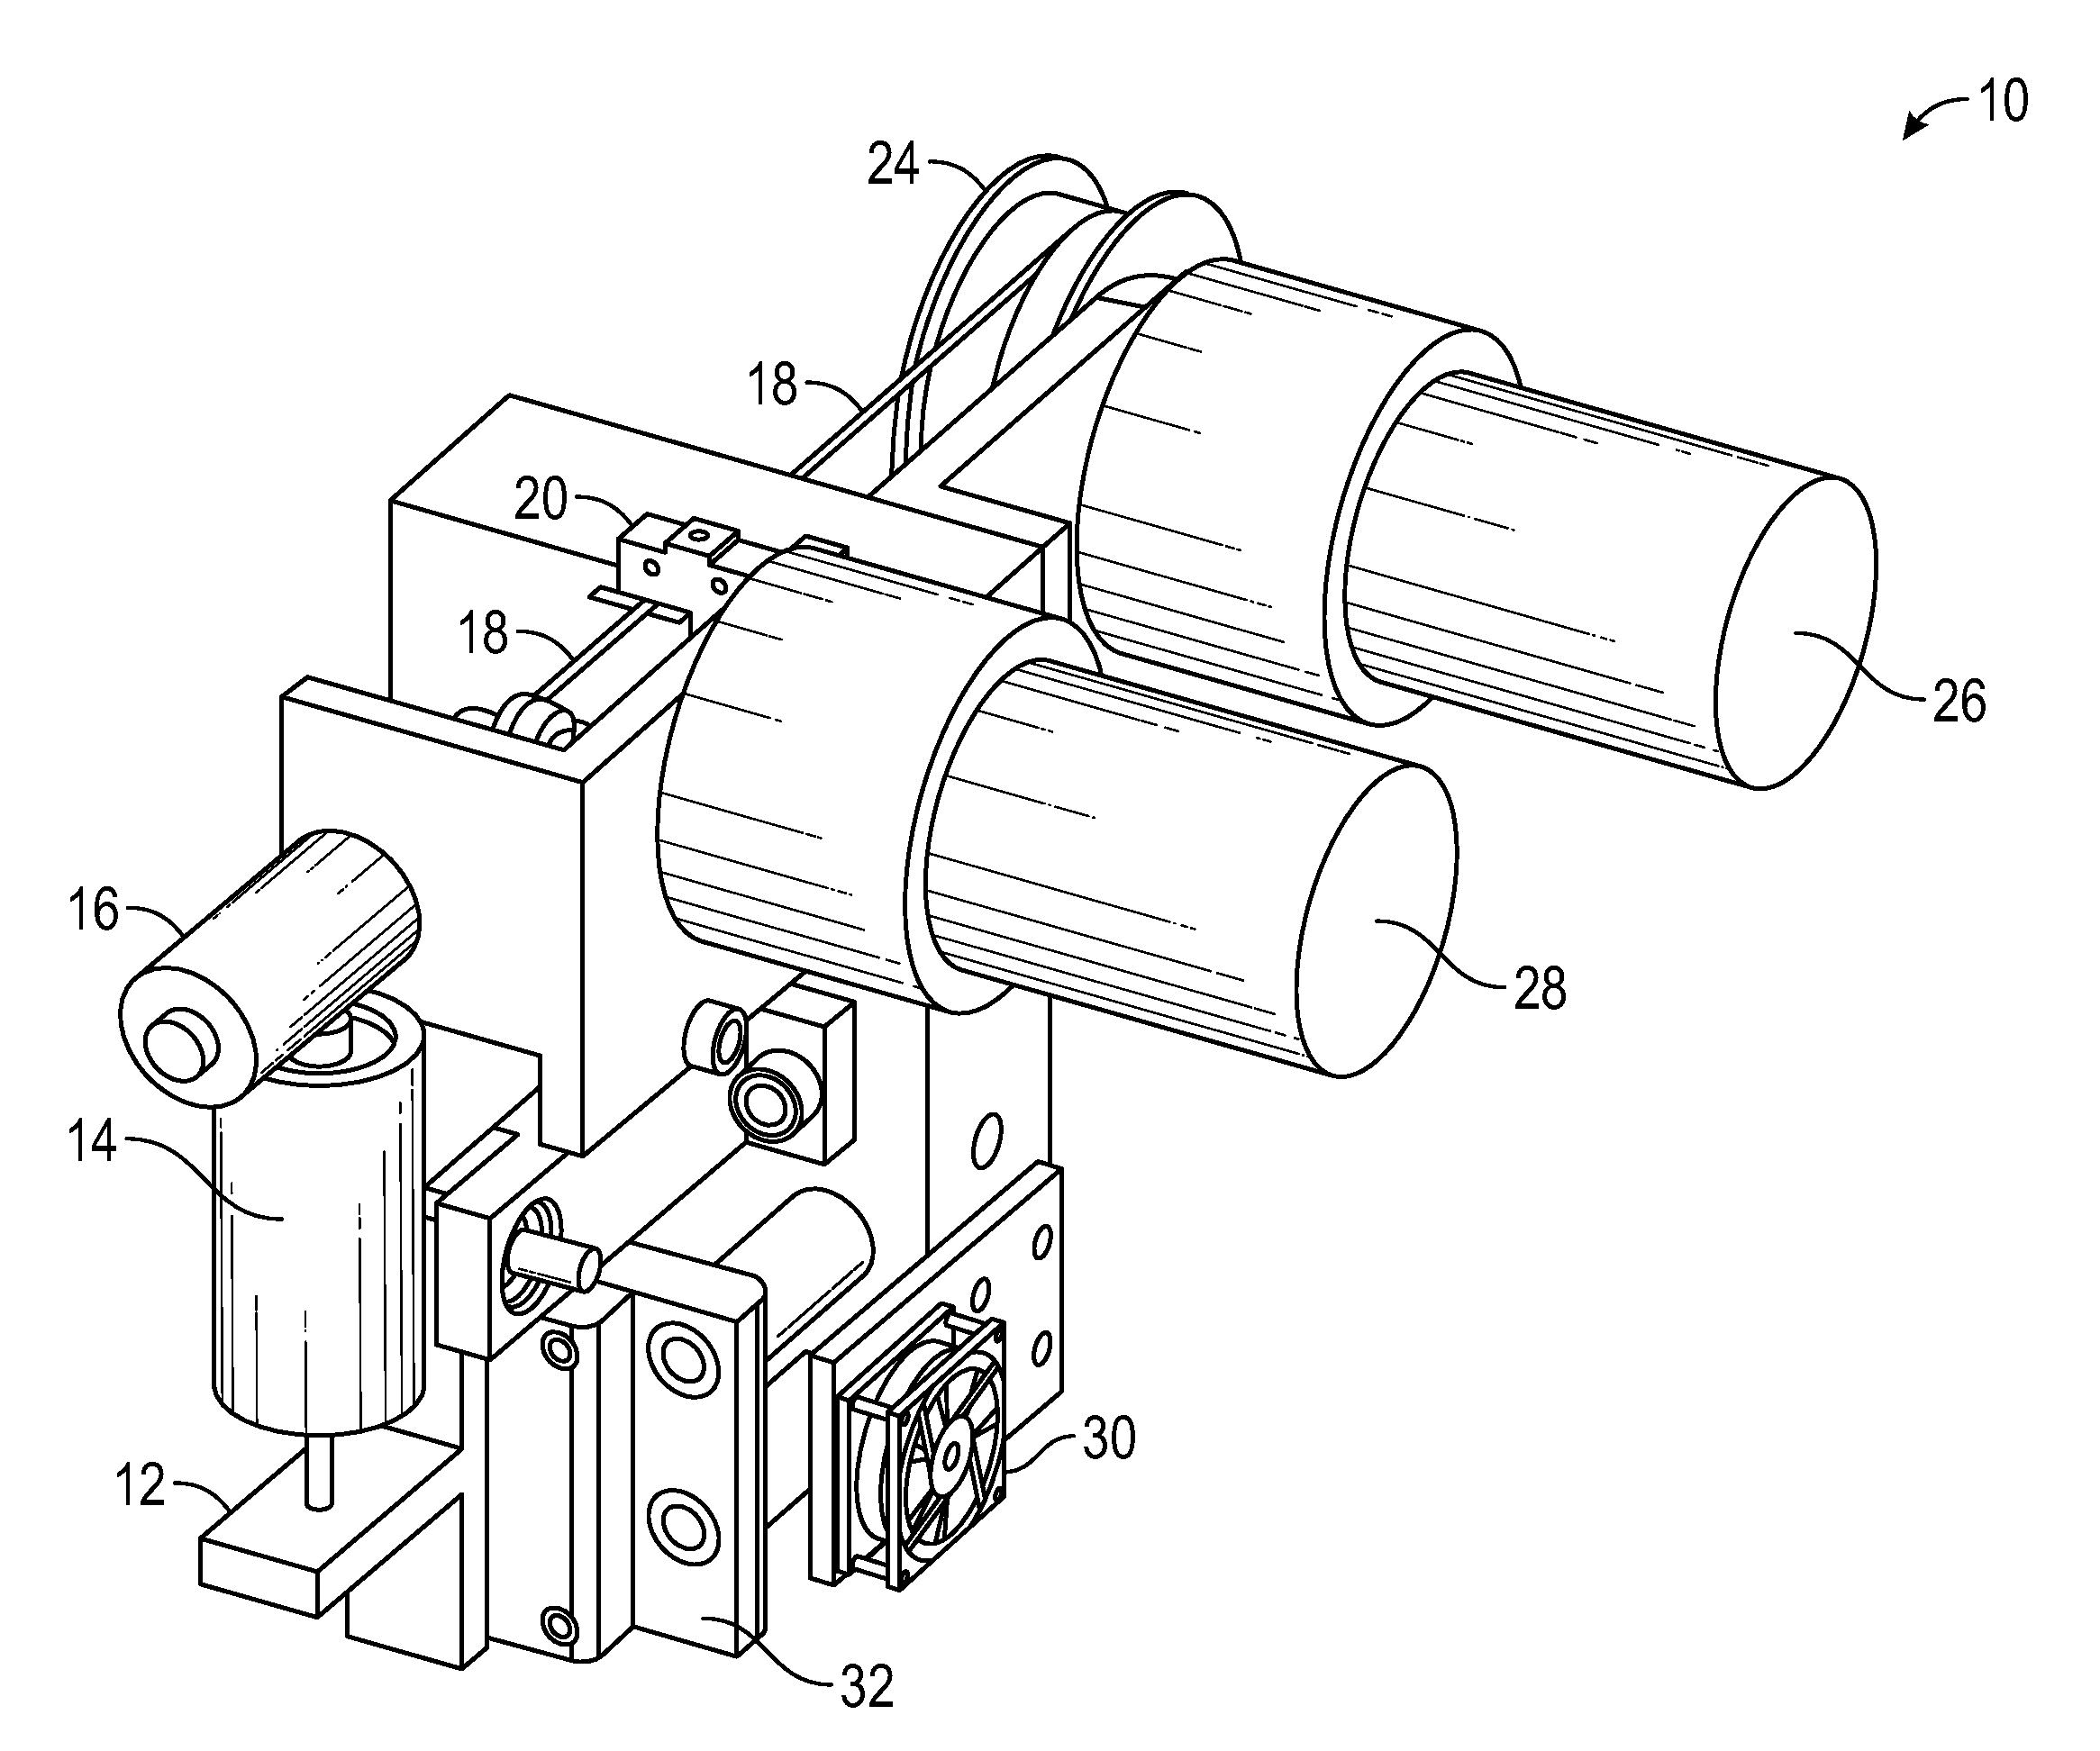 Method and apparatus for wire handling and embedding on and within 3D printed parts